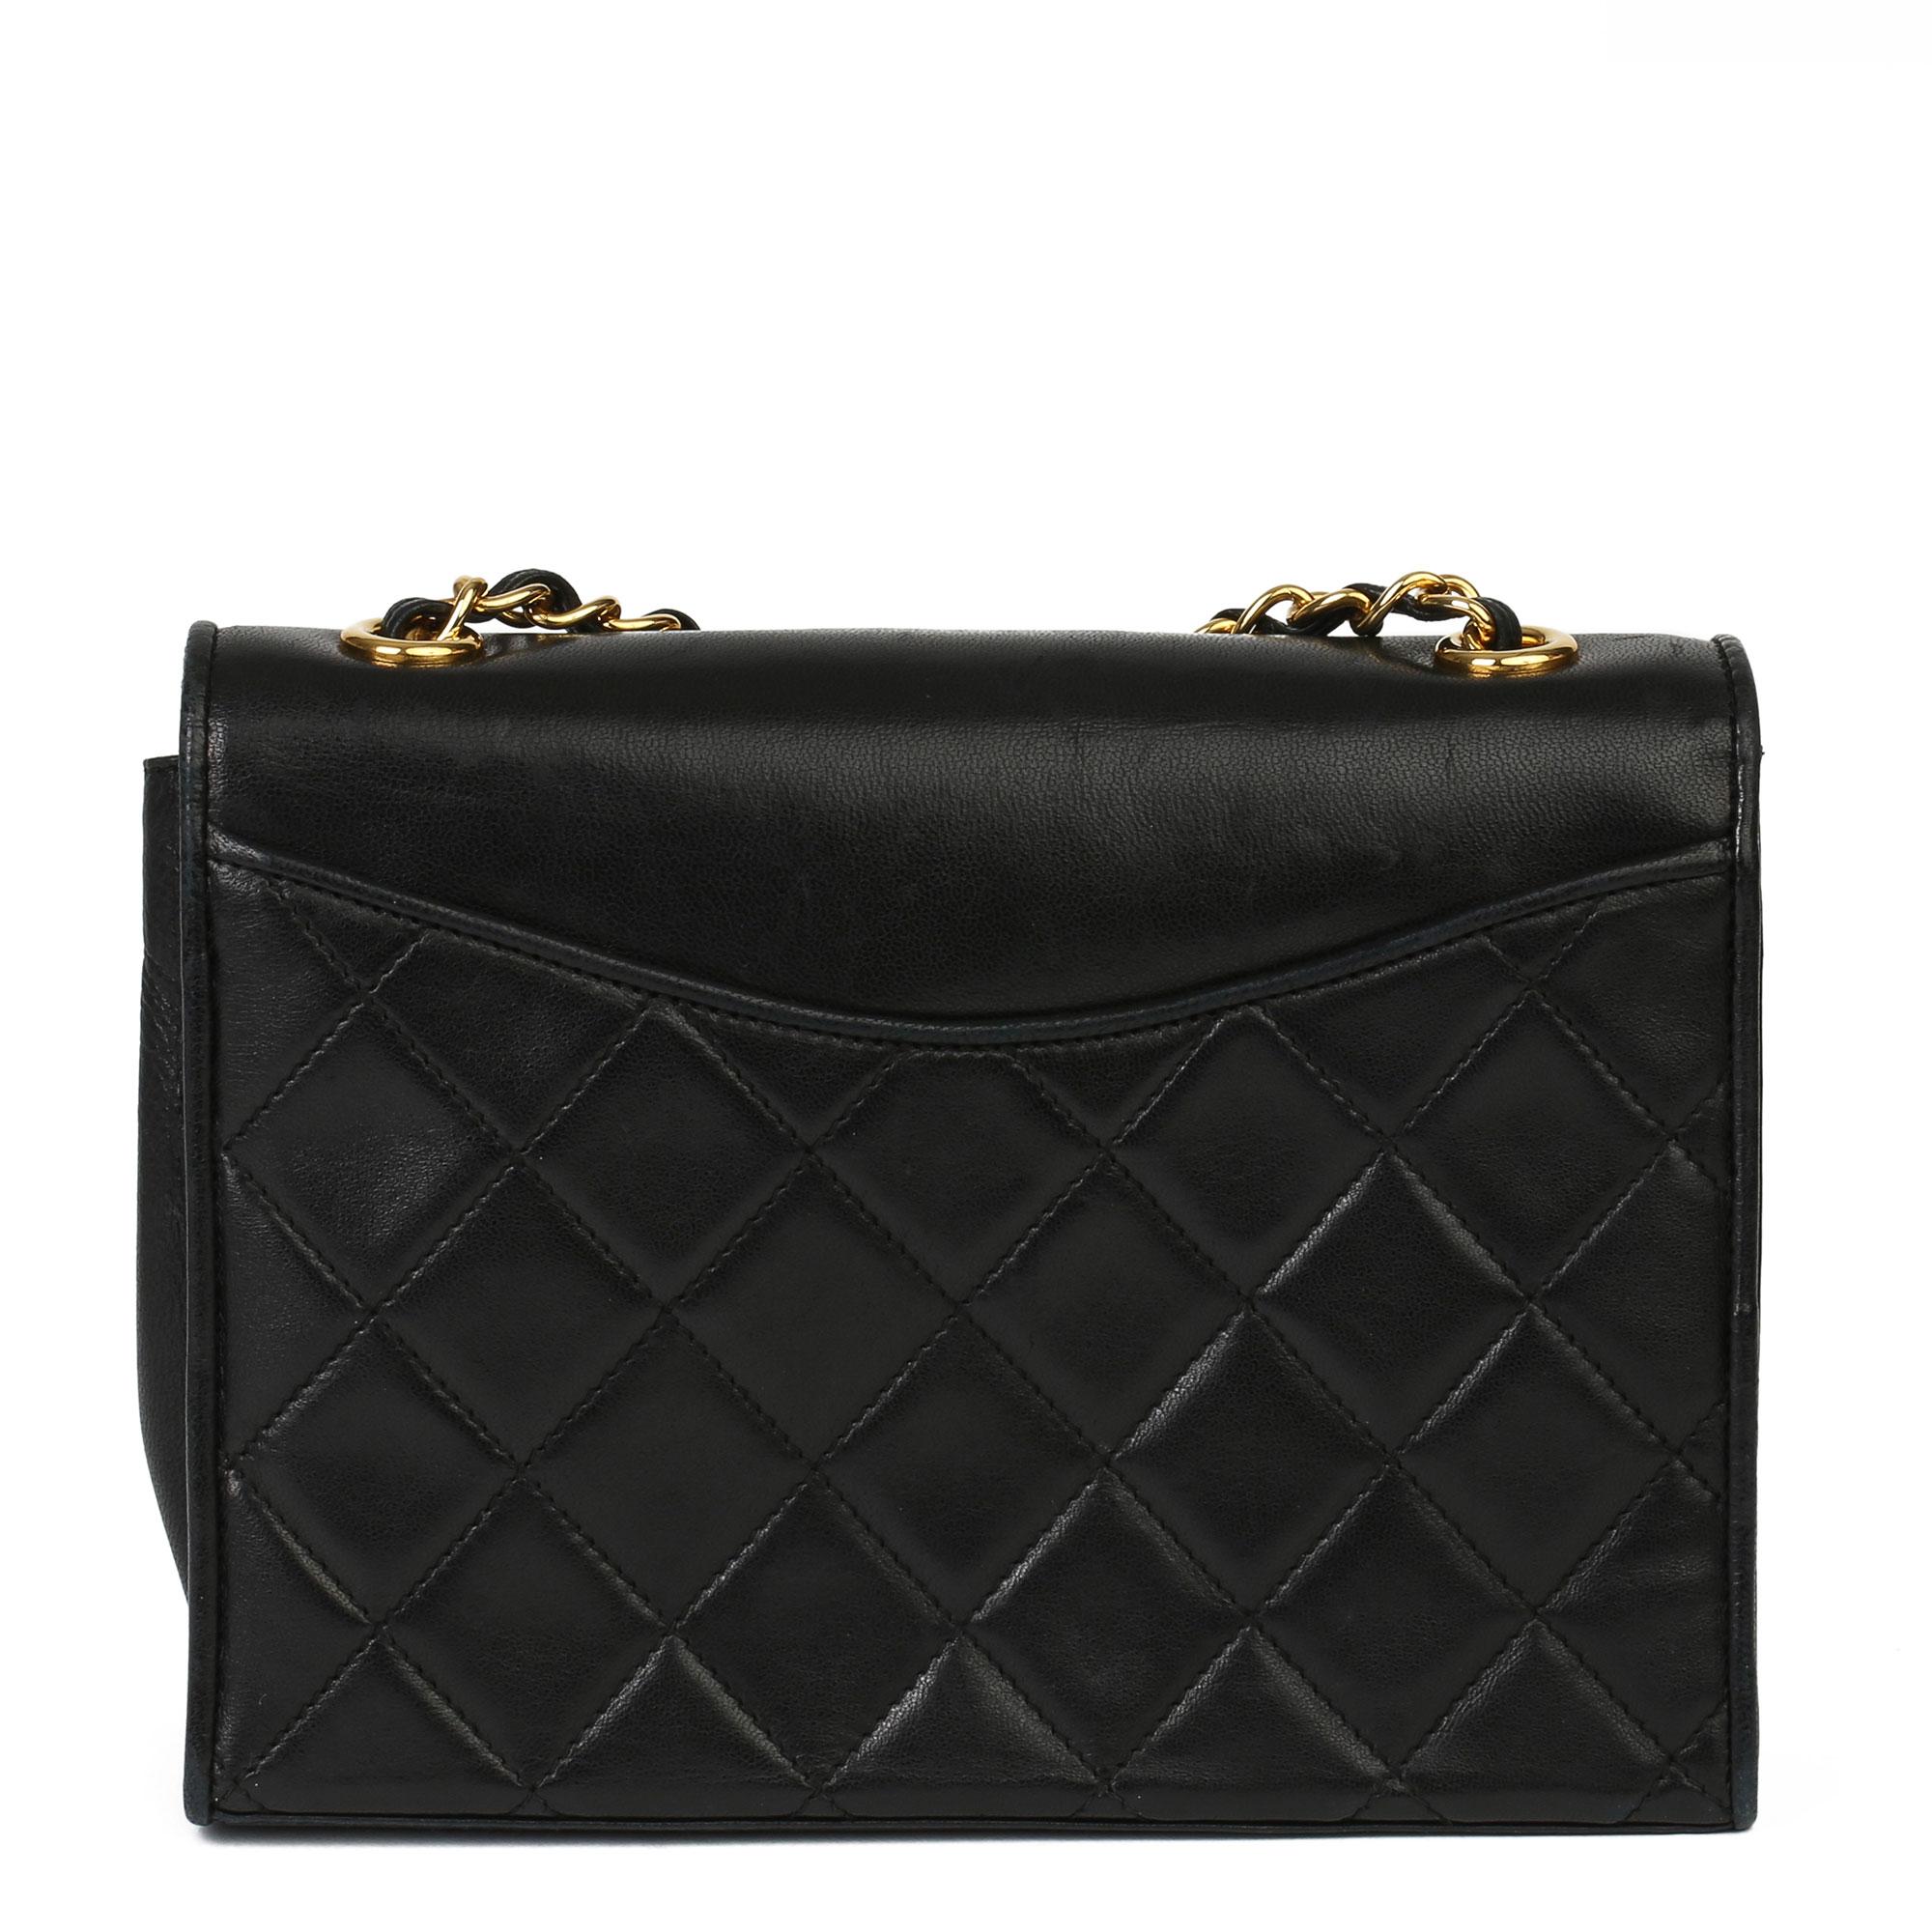 1989 Chanel Black Quilted Lambskin Vintage Timeless Single Flap Bag  5